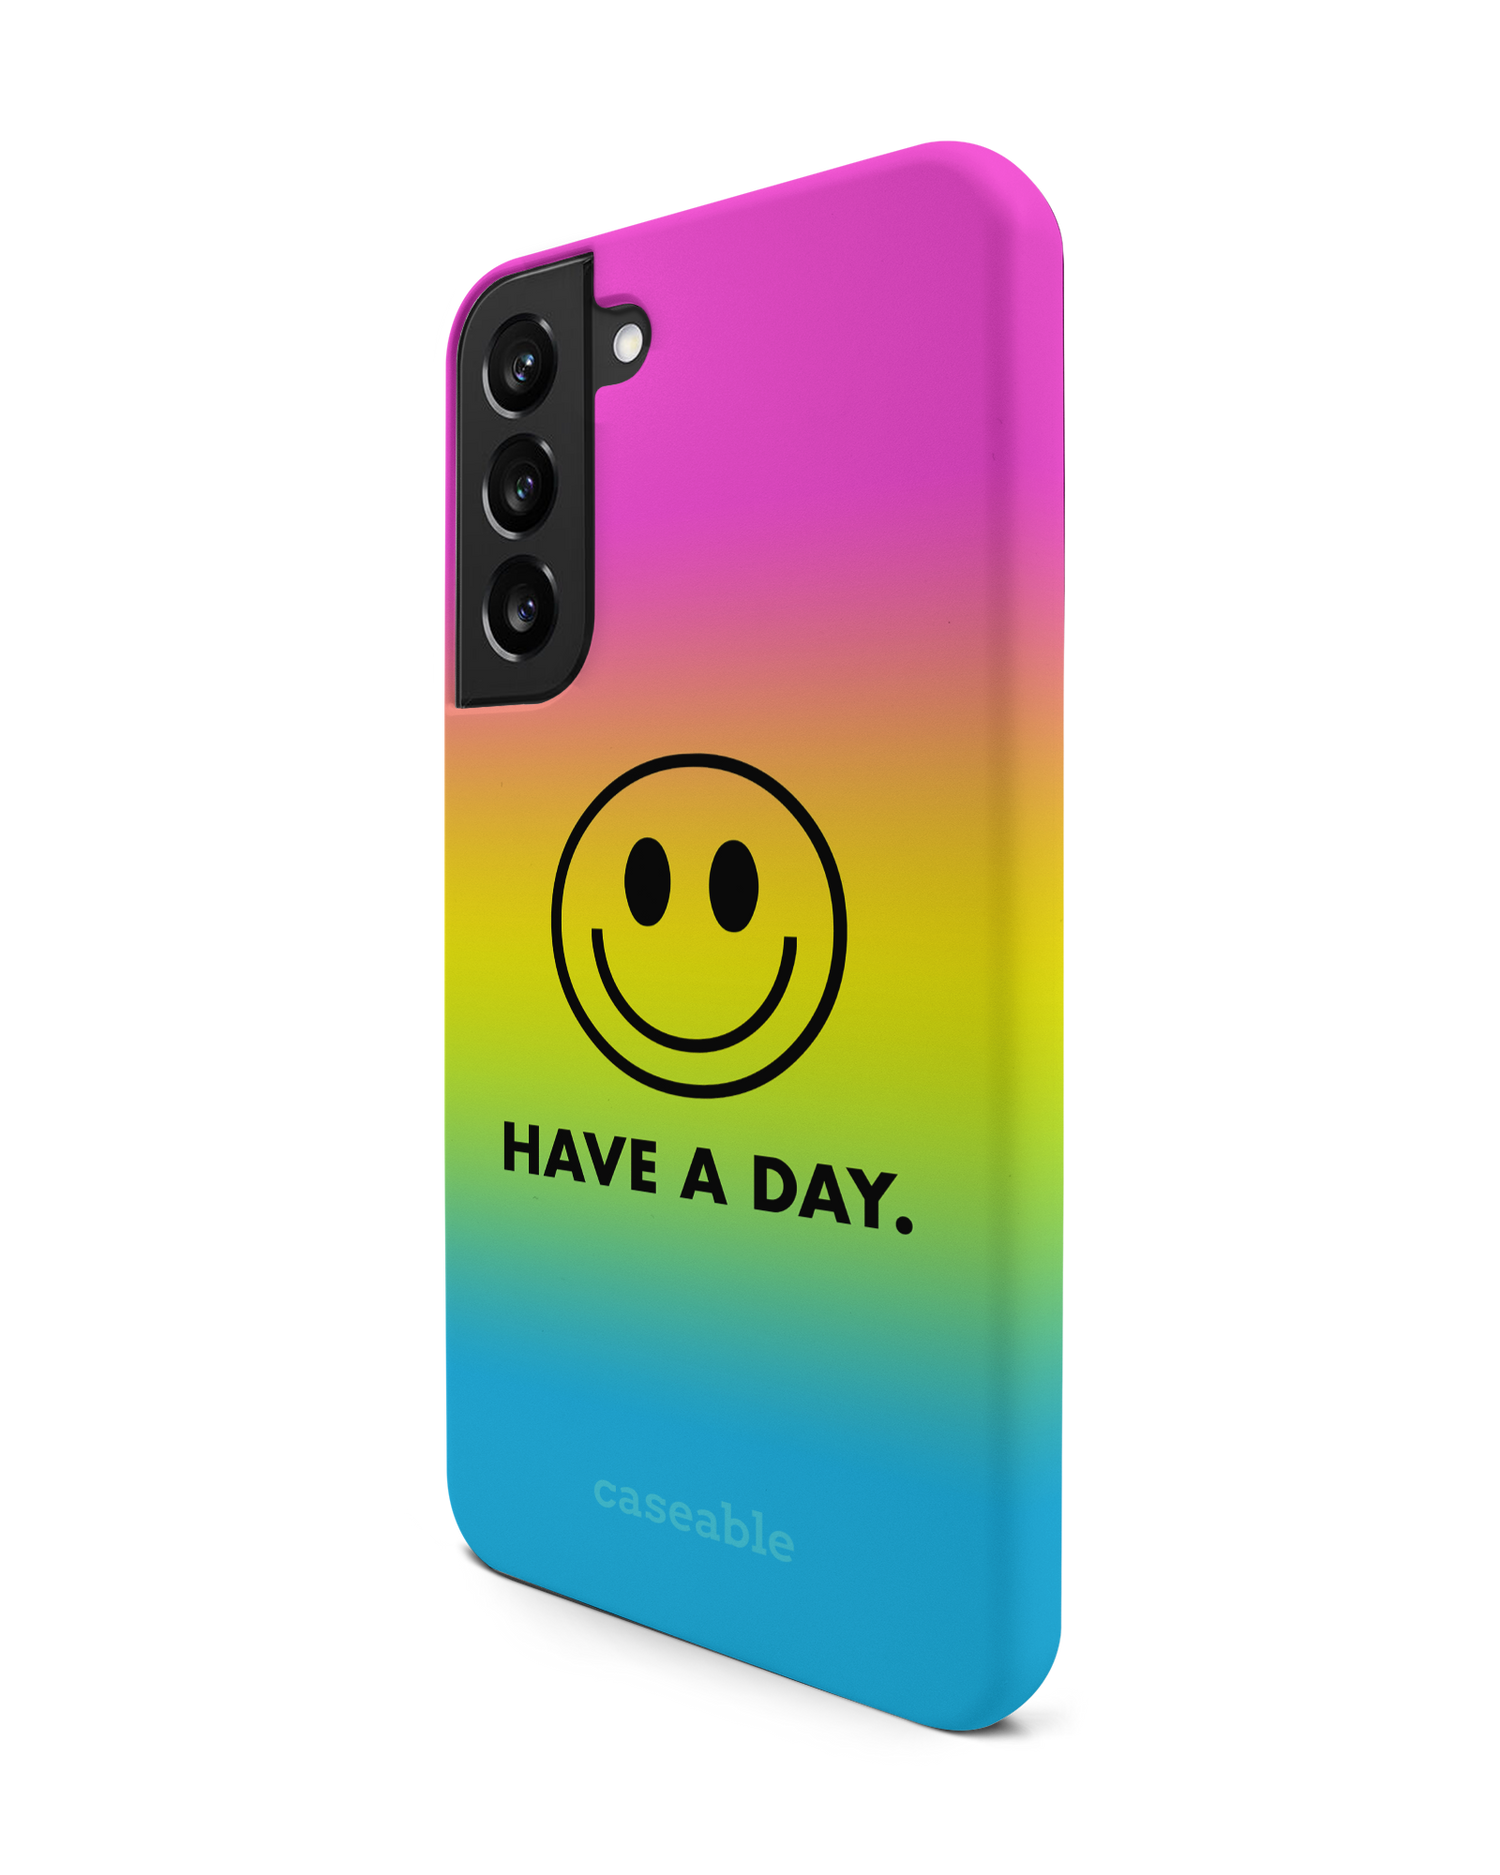 Have A Day Premium Phone Case Samsung Galaxy S22 Plus 5G: View from the right side